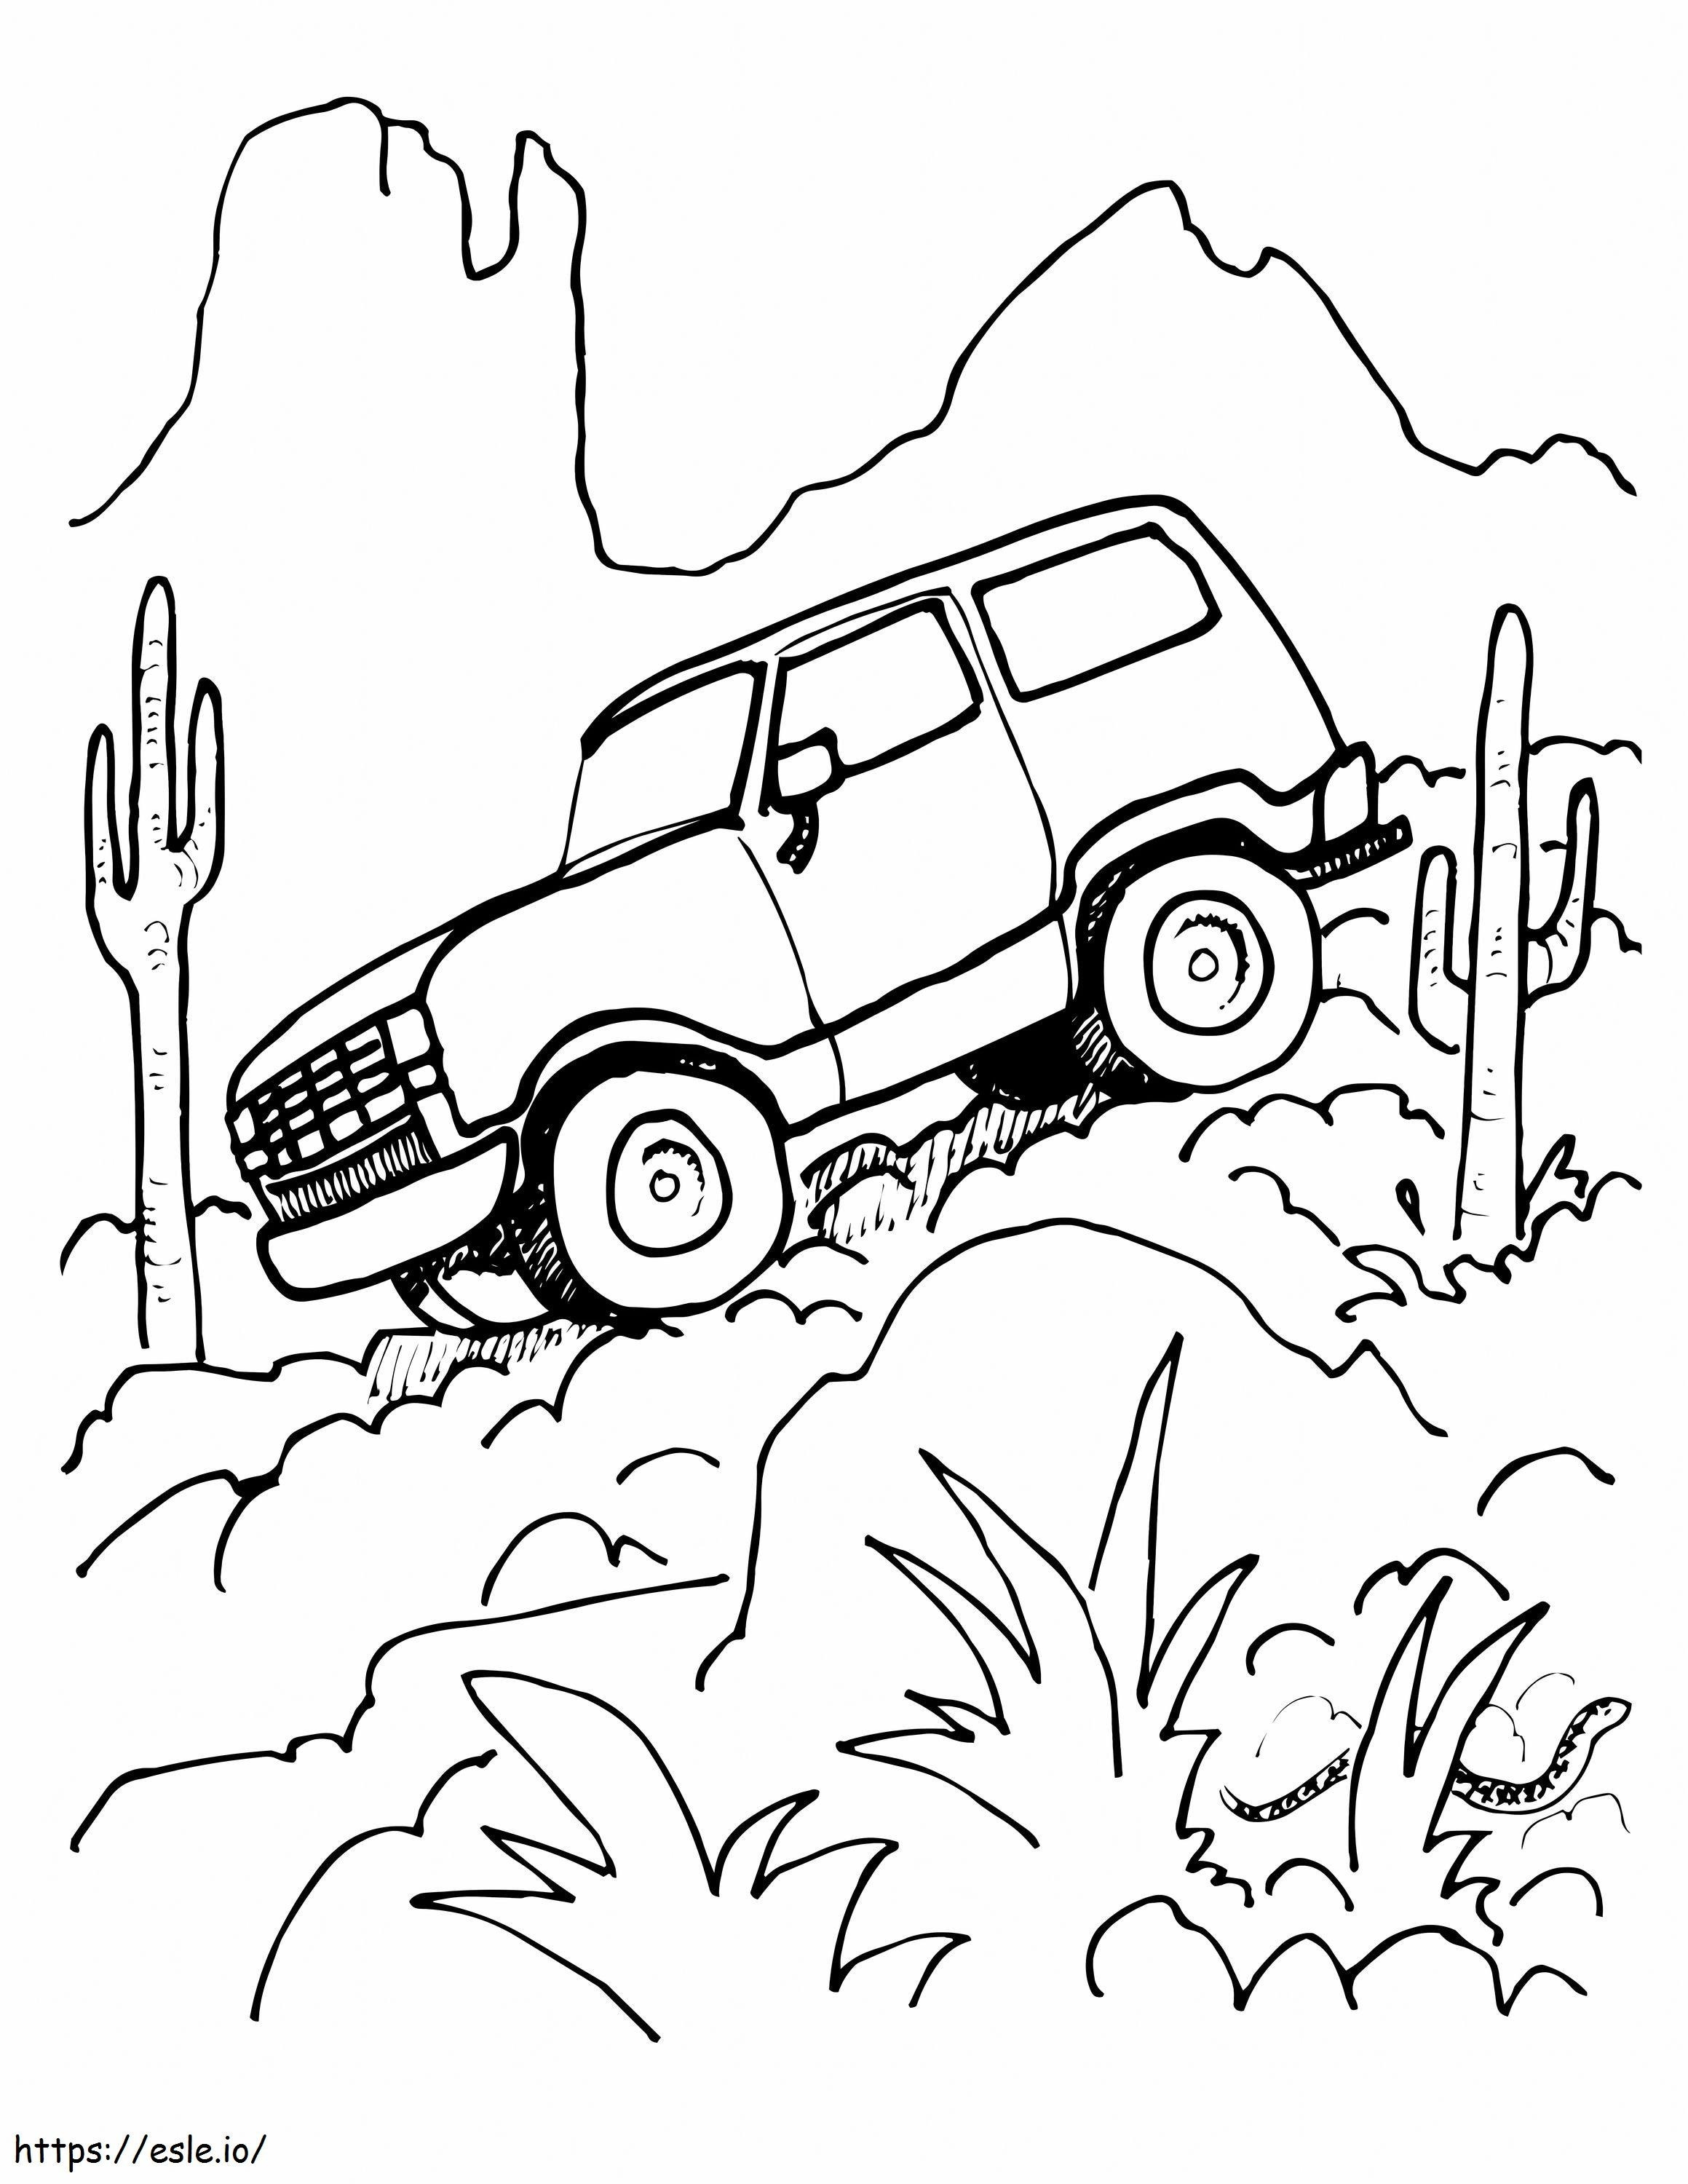 Road In The Mountain coloring page